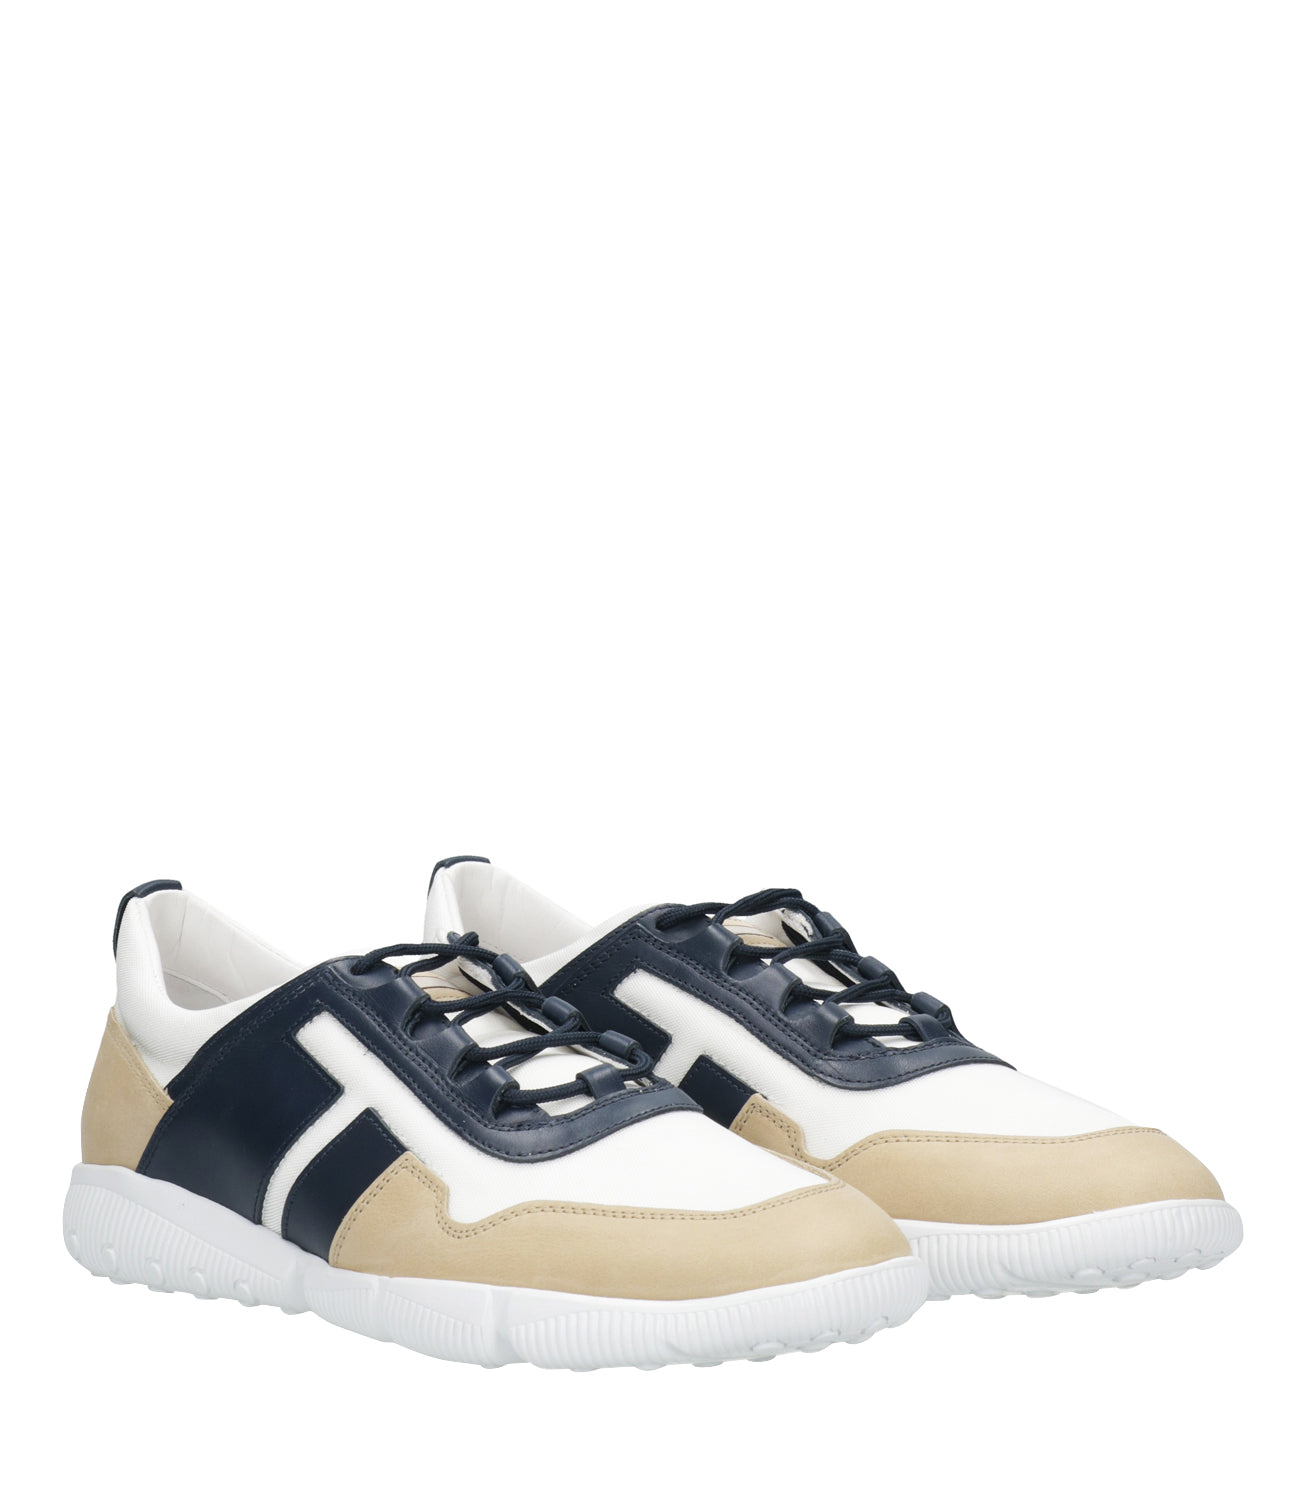 Sneakers in nubuck and technical fabric